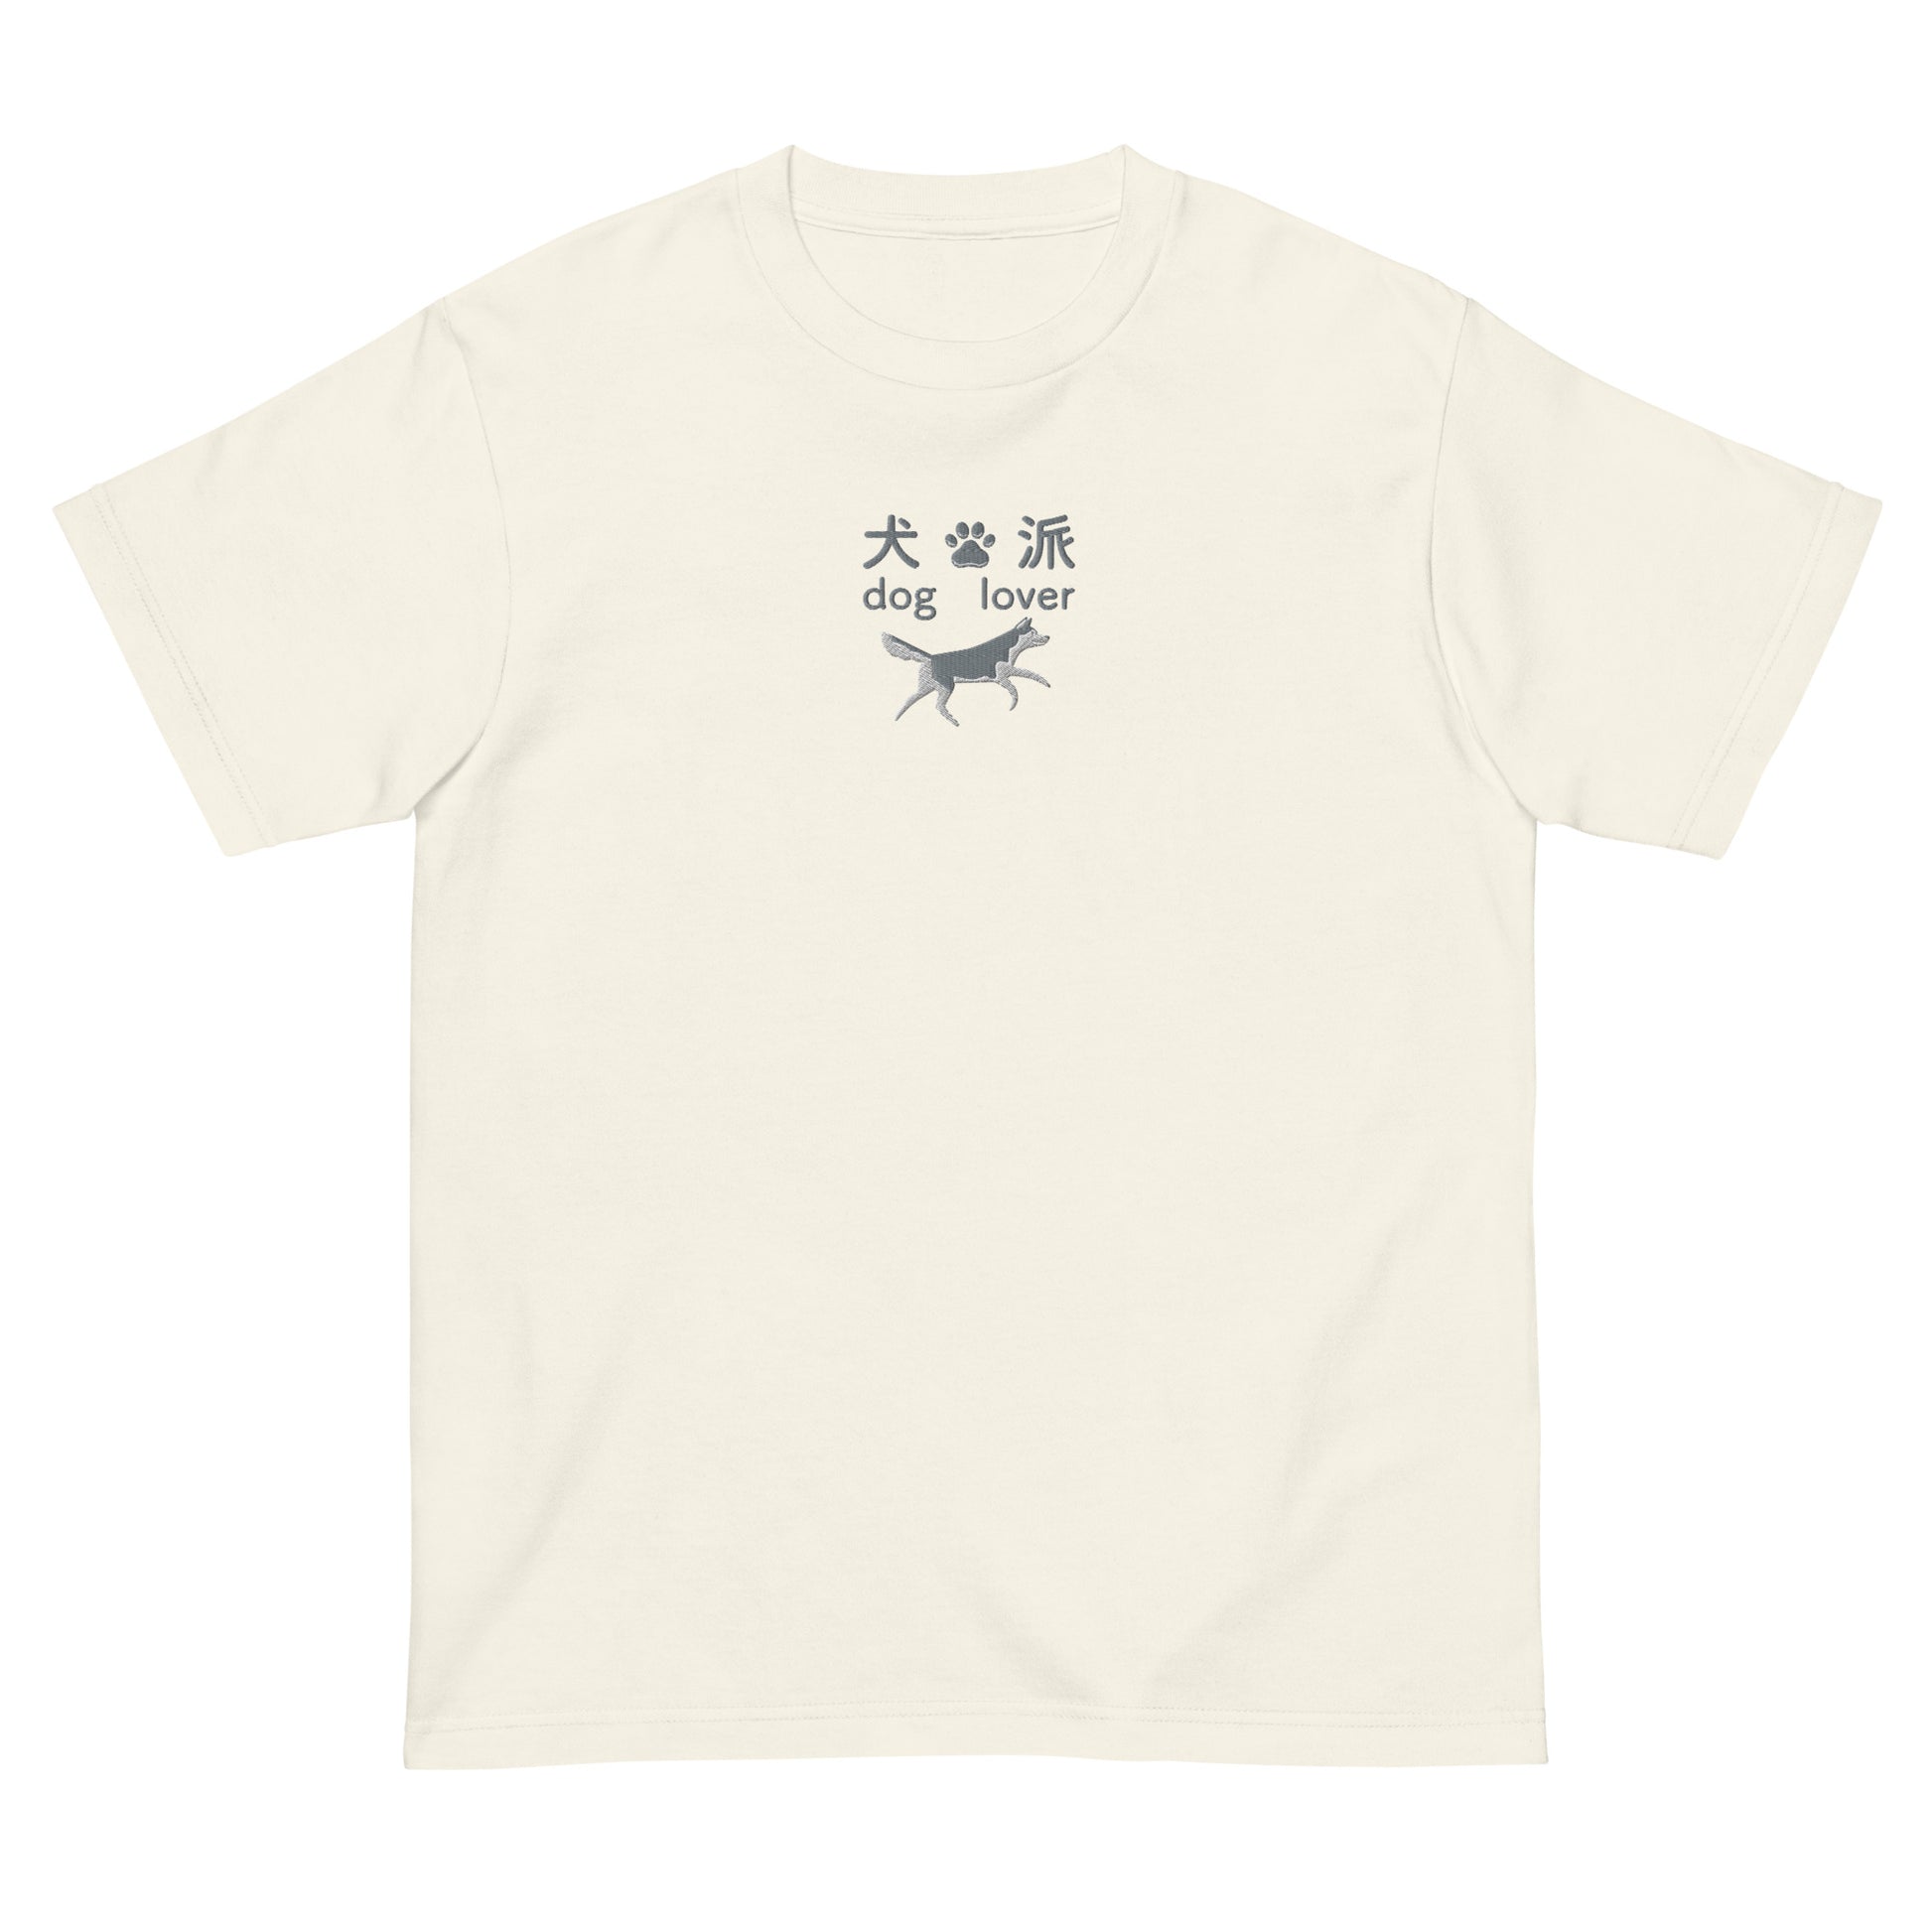 Ivory High Quality Tee - Front Design with an Gray, White Embroidery "Dog Lover" in Japanese,Chinese and English, and Dog Embroidery